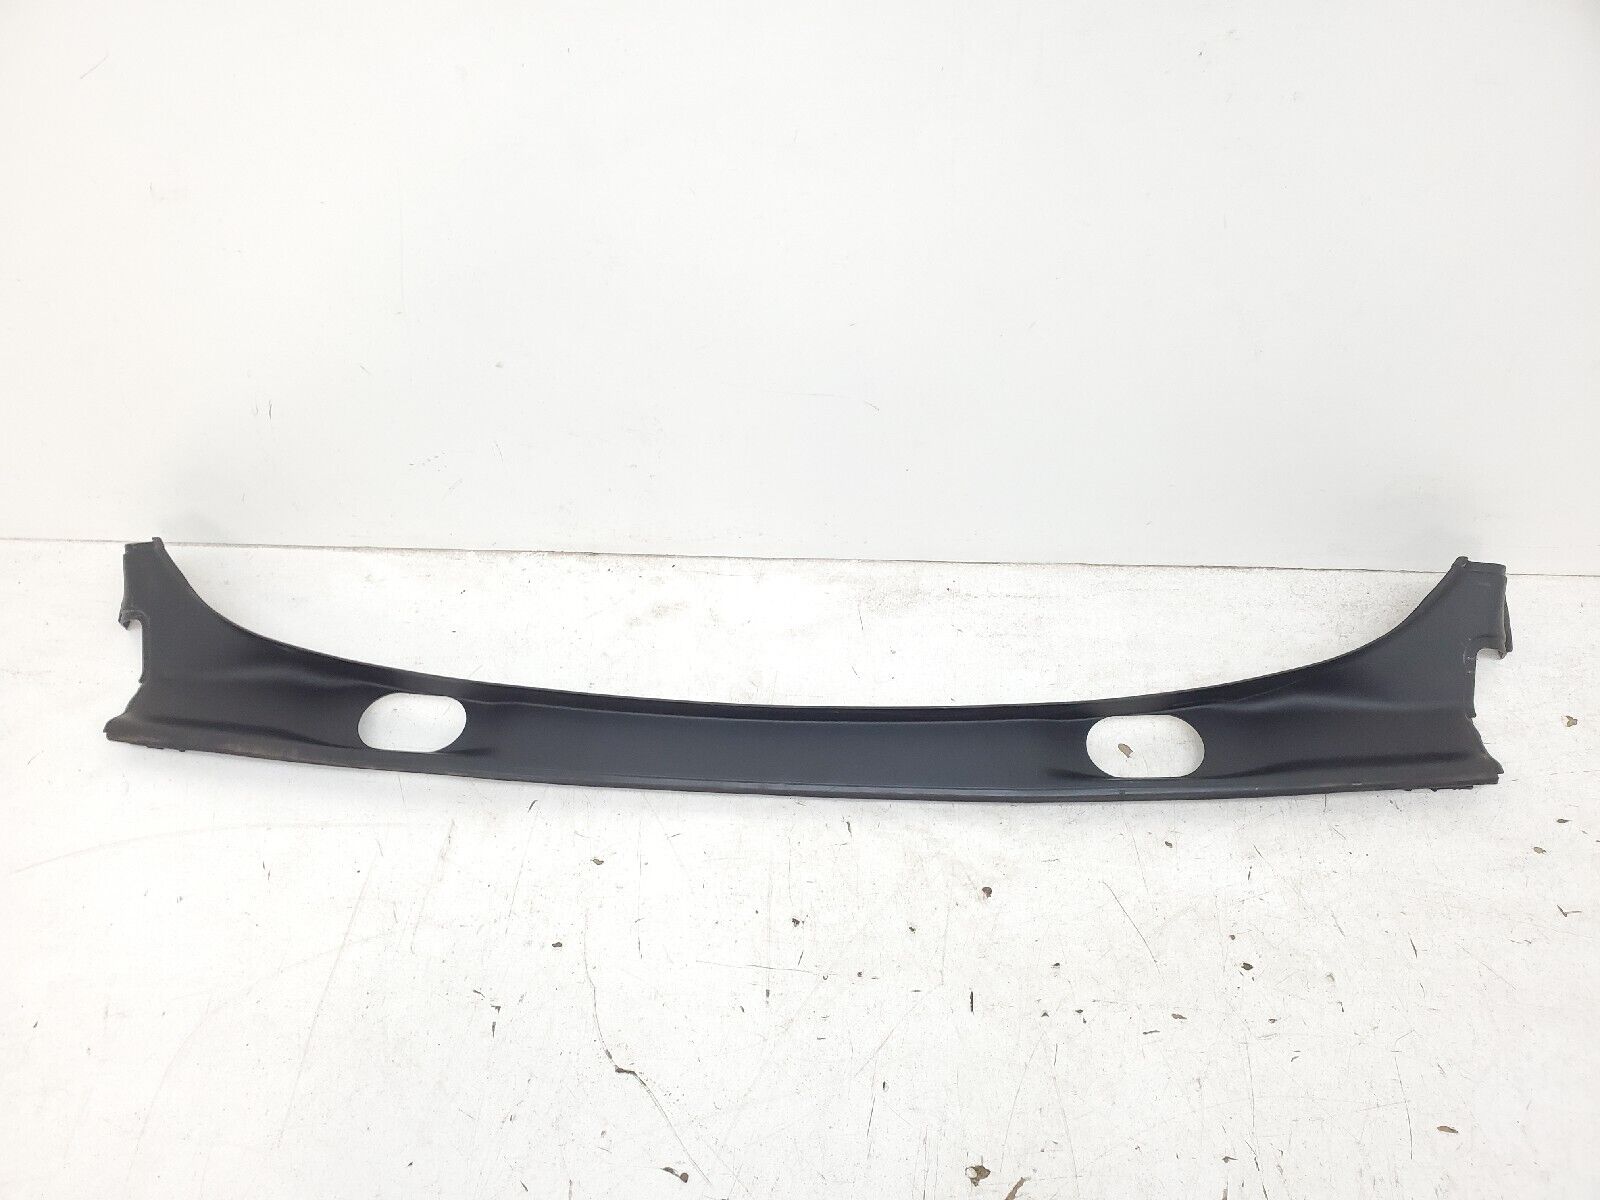 2014-2020 ACURA MDX REAR BODY ROOF GUTTER HEADER TOP TRIM COVER PANEL OEM 